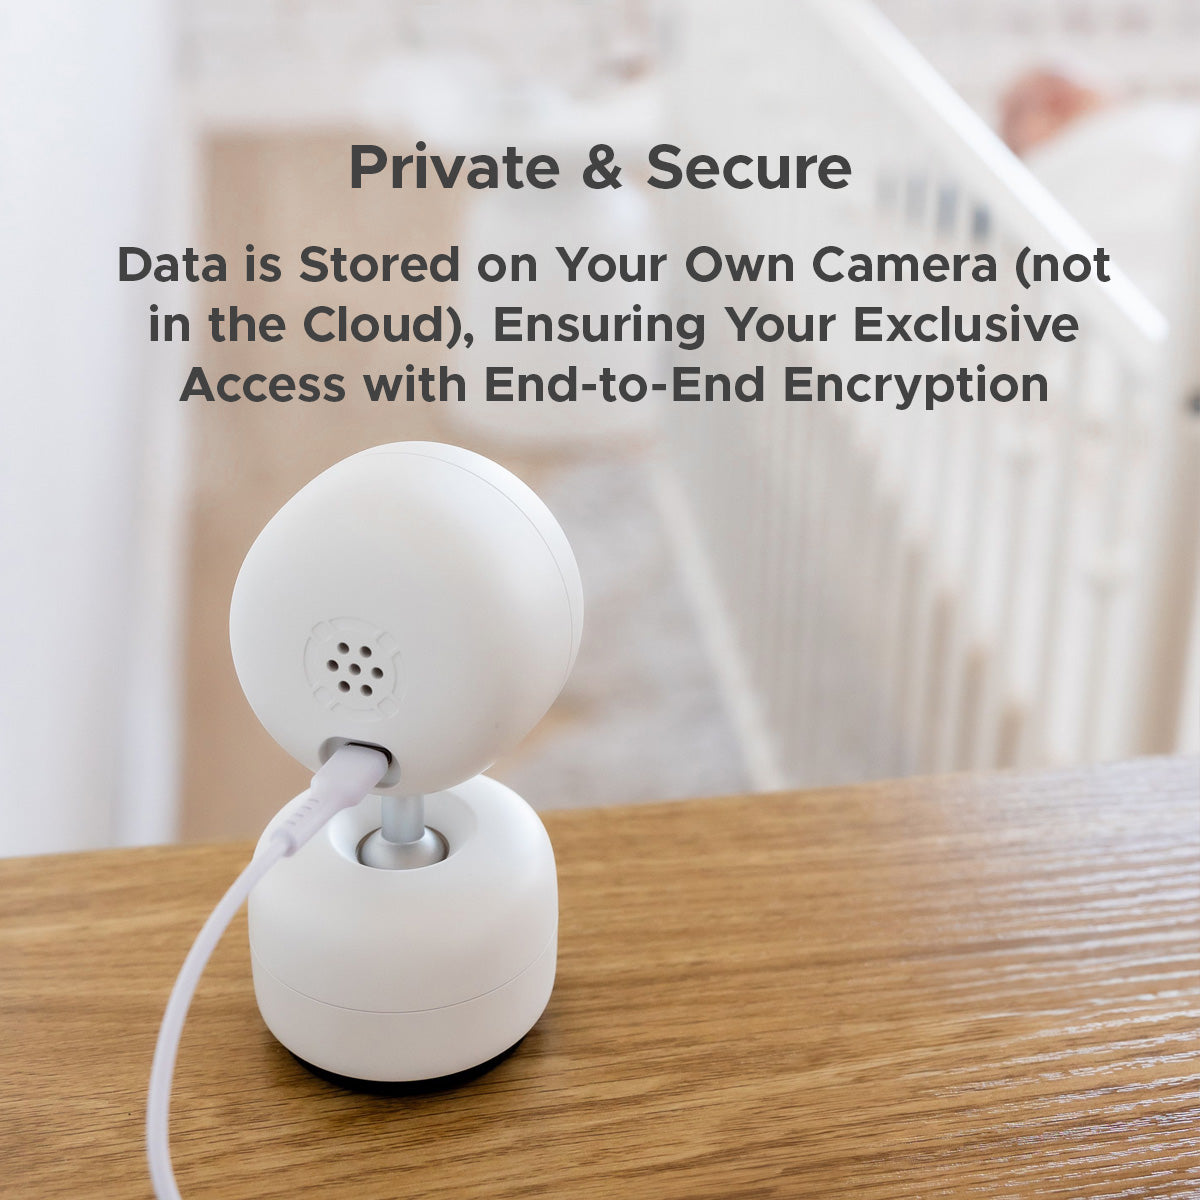 Image of back of camera with text overlay: Private & Secure.  Data is Stored on Your Own Camera (not in the Cloud), Ensuring Your Exclusive Access with End-to-End Encryption